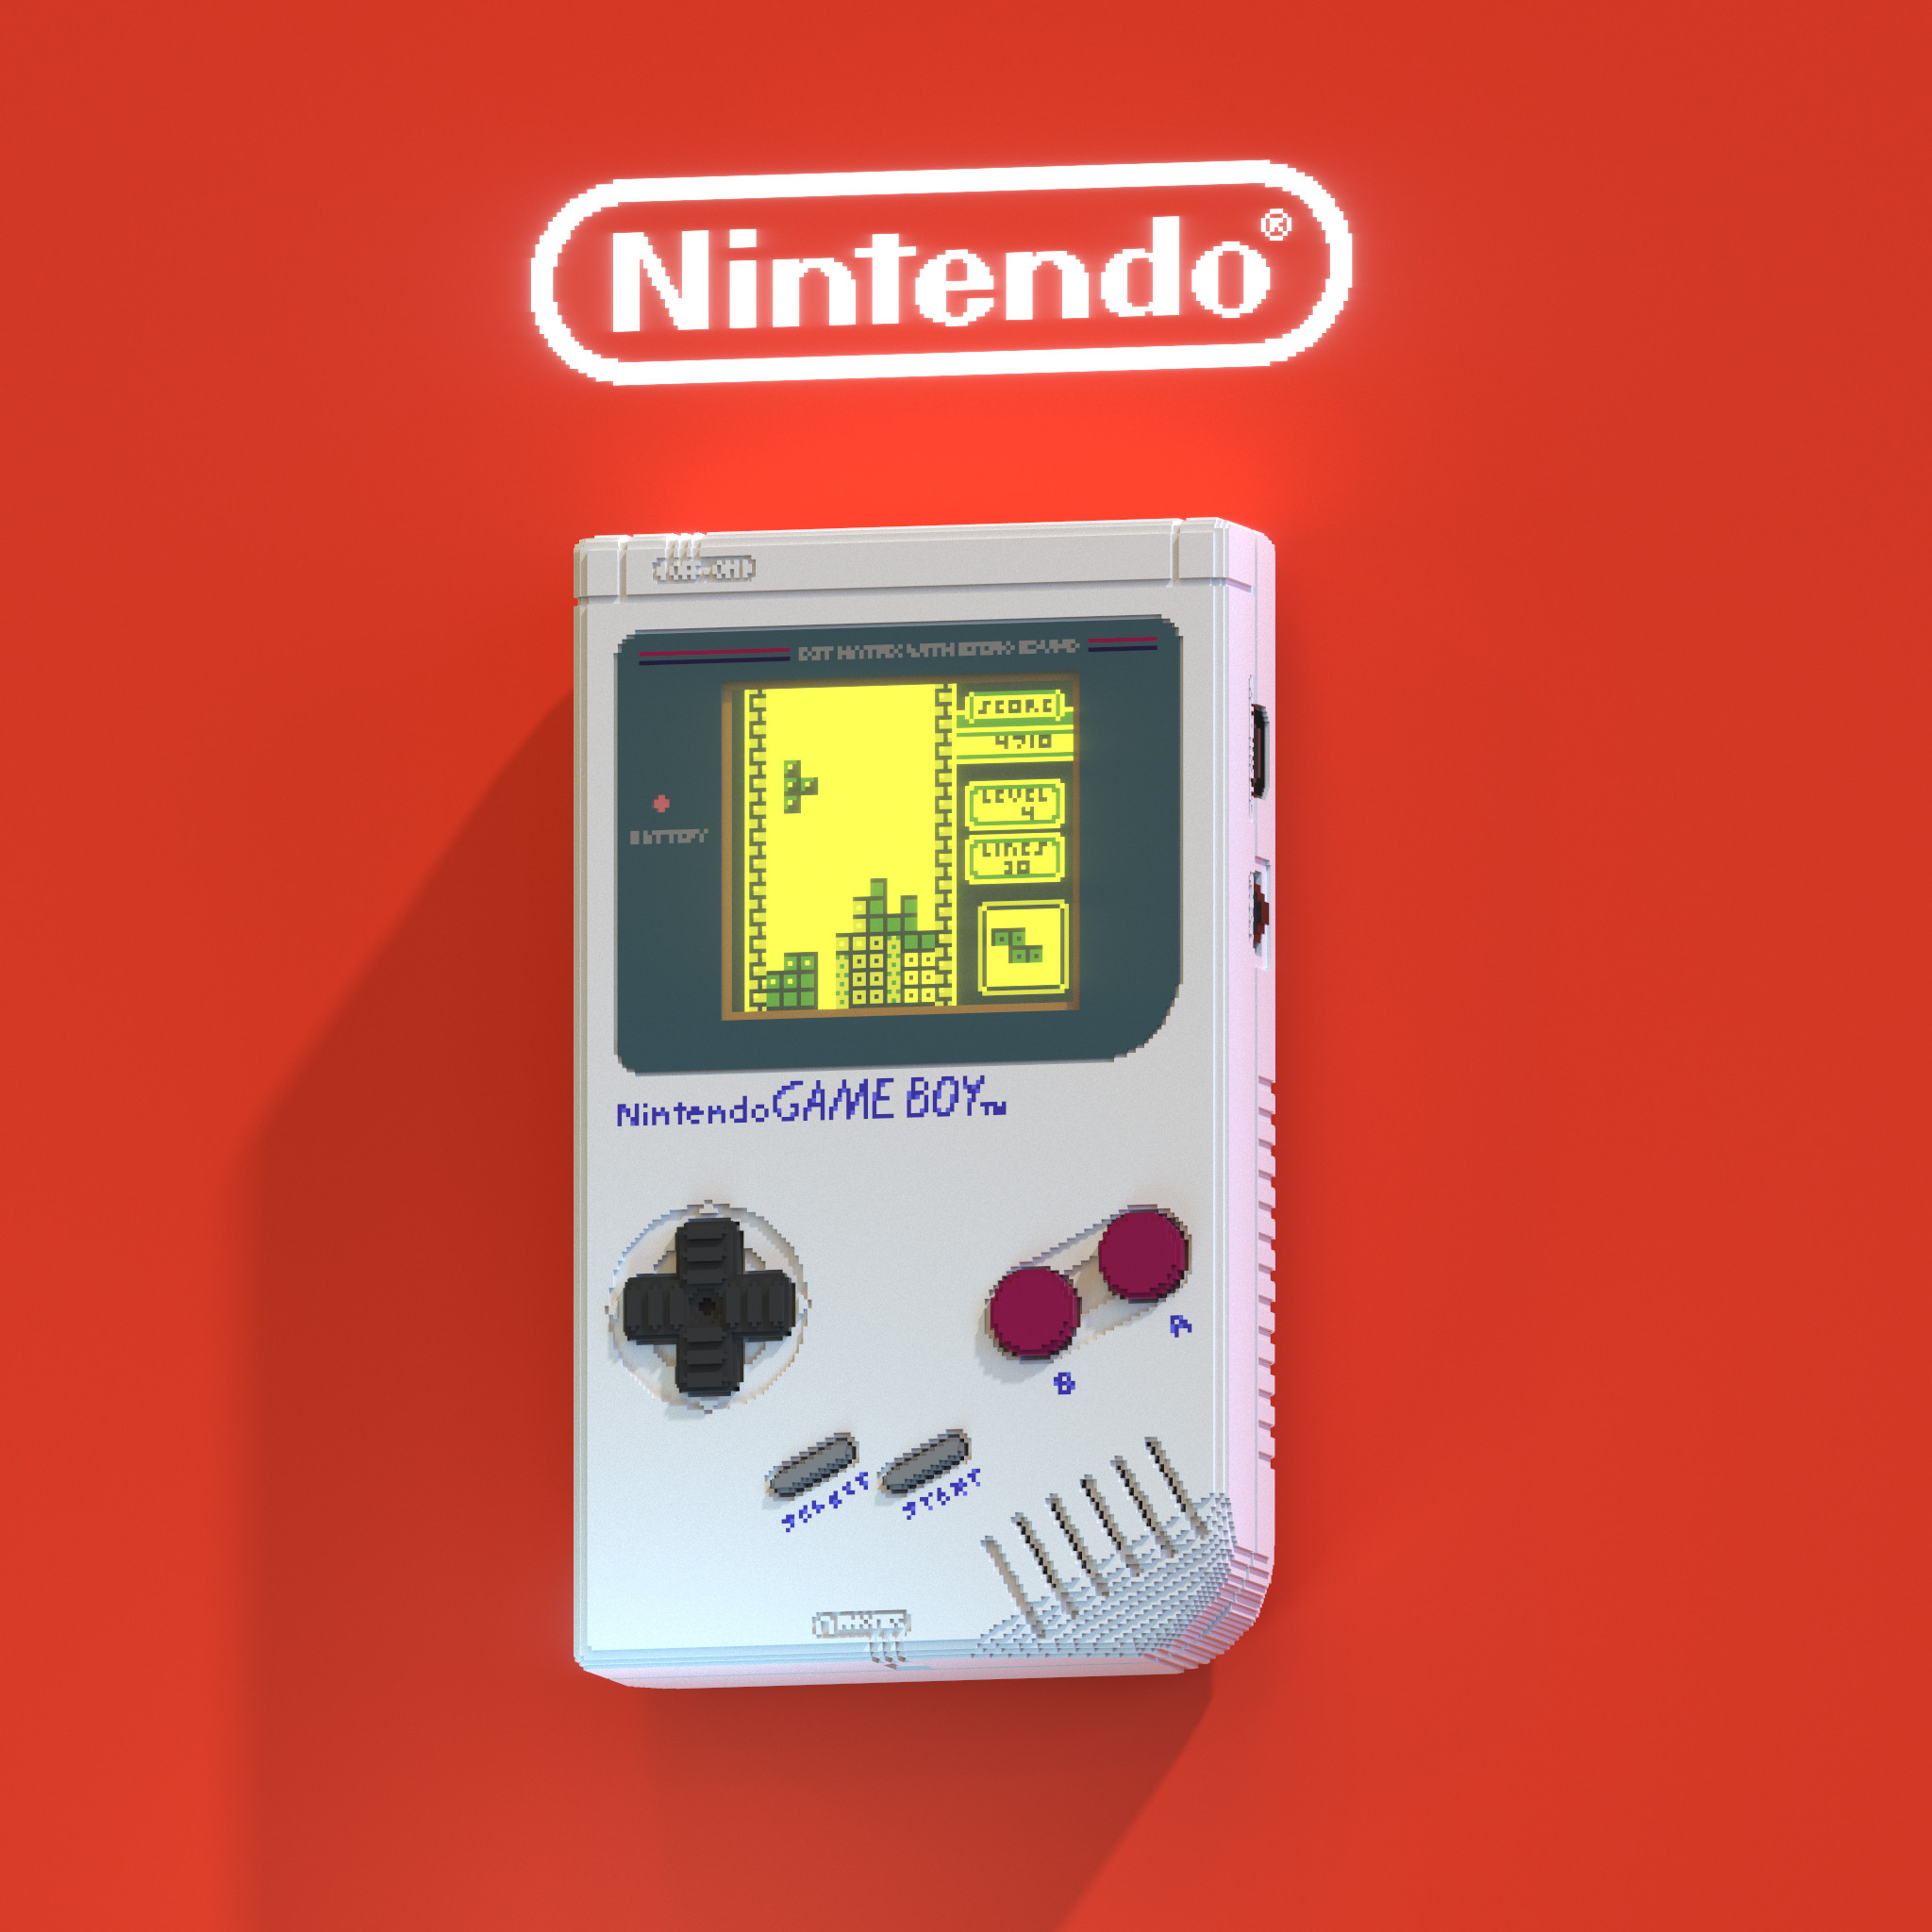 Original Nintendo Game Boy Voxel Remake created and rendered using Magicavoxel software.